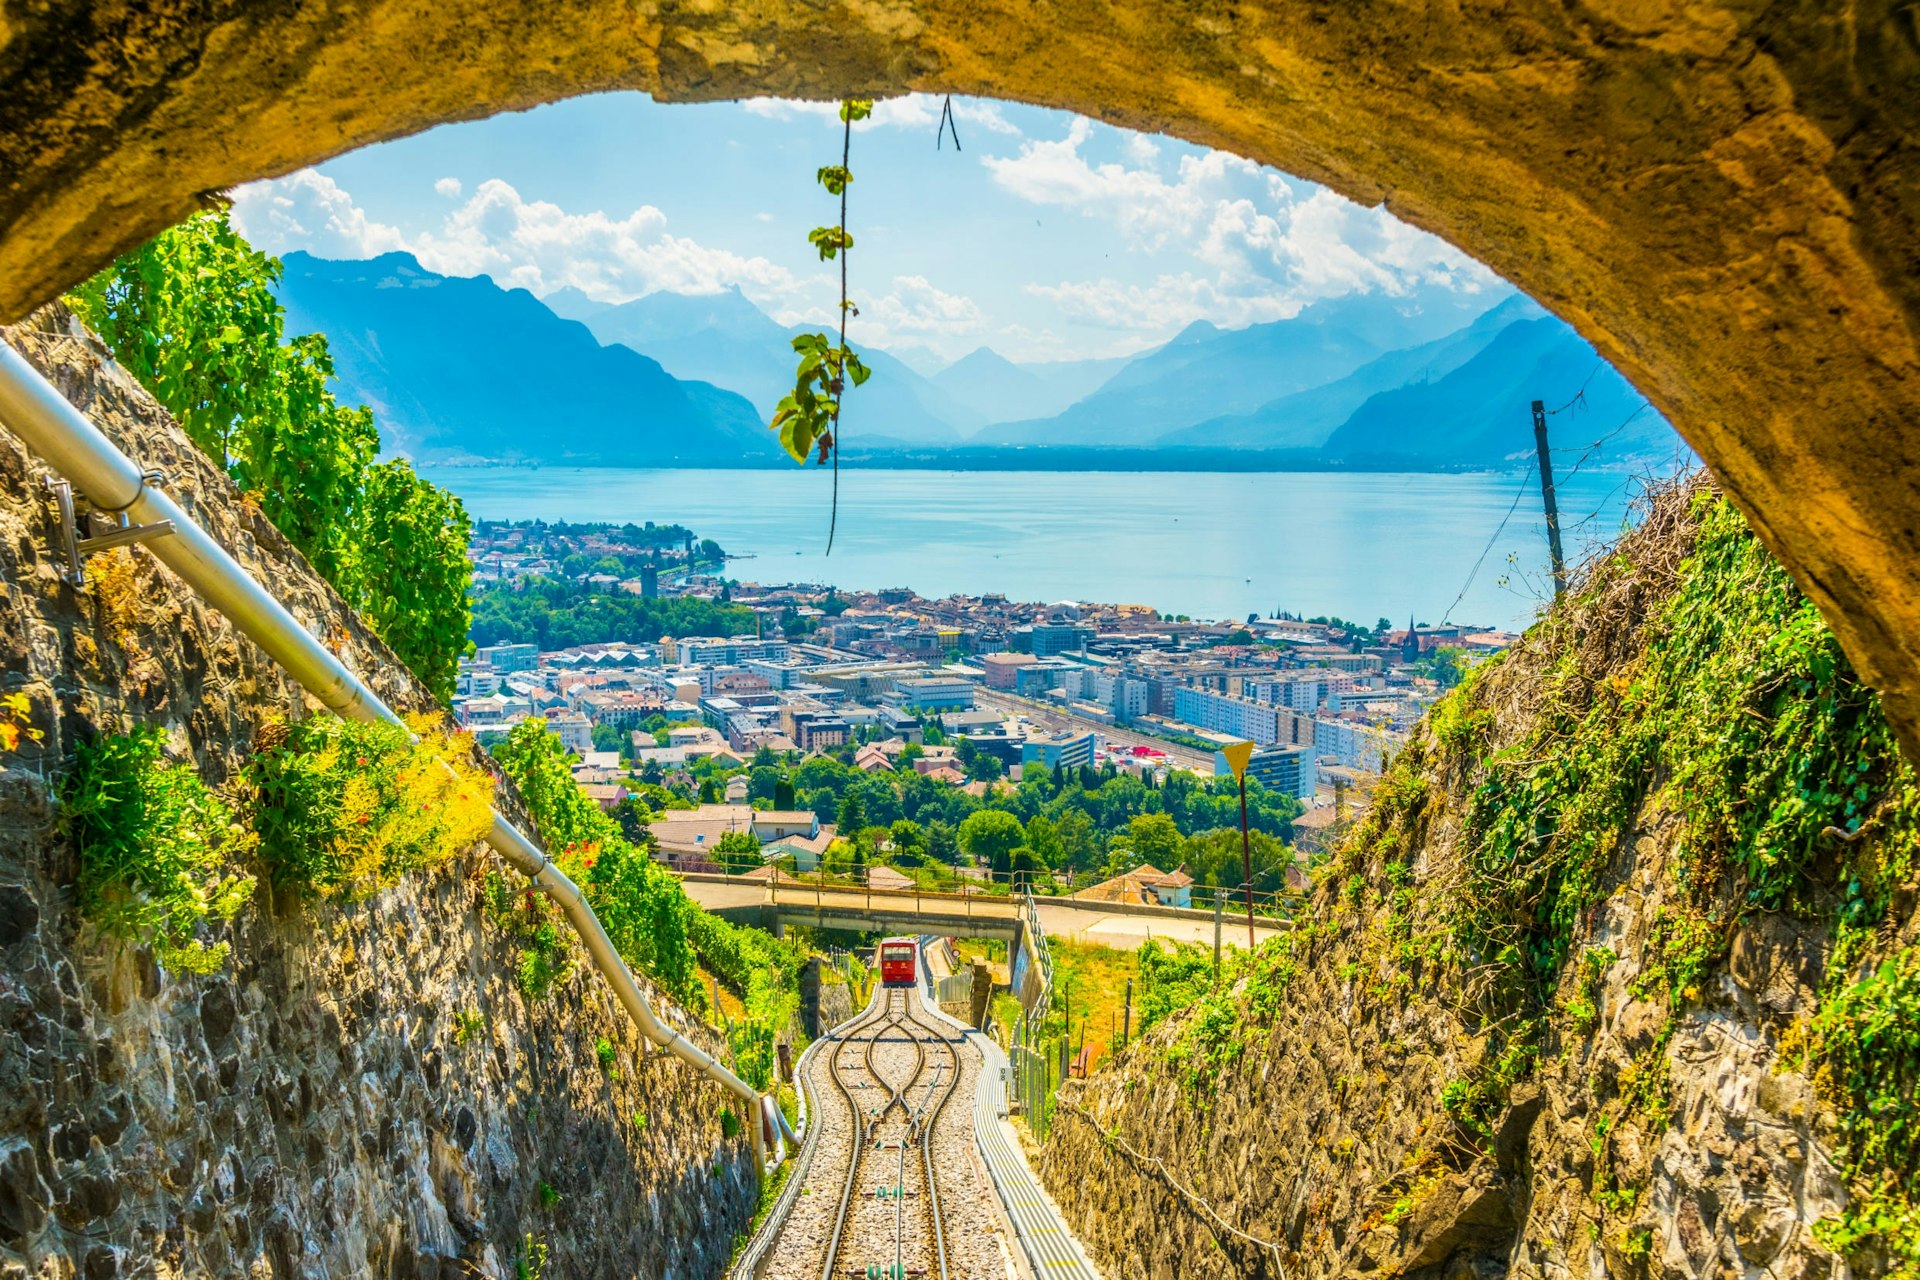 Vevey and lake Geneva, as seen from the funicular ascending to Mont Pelerin